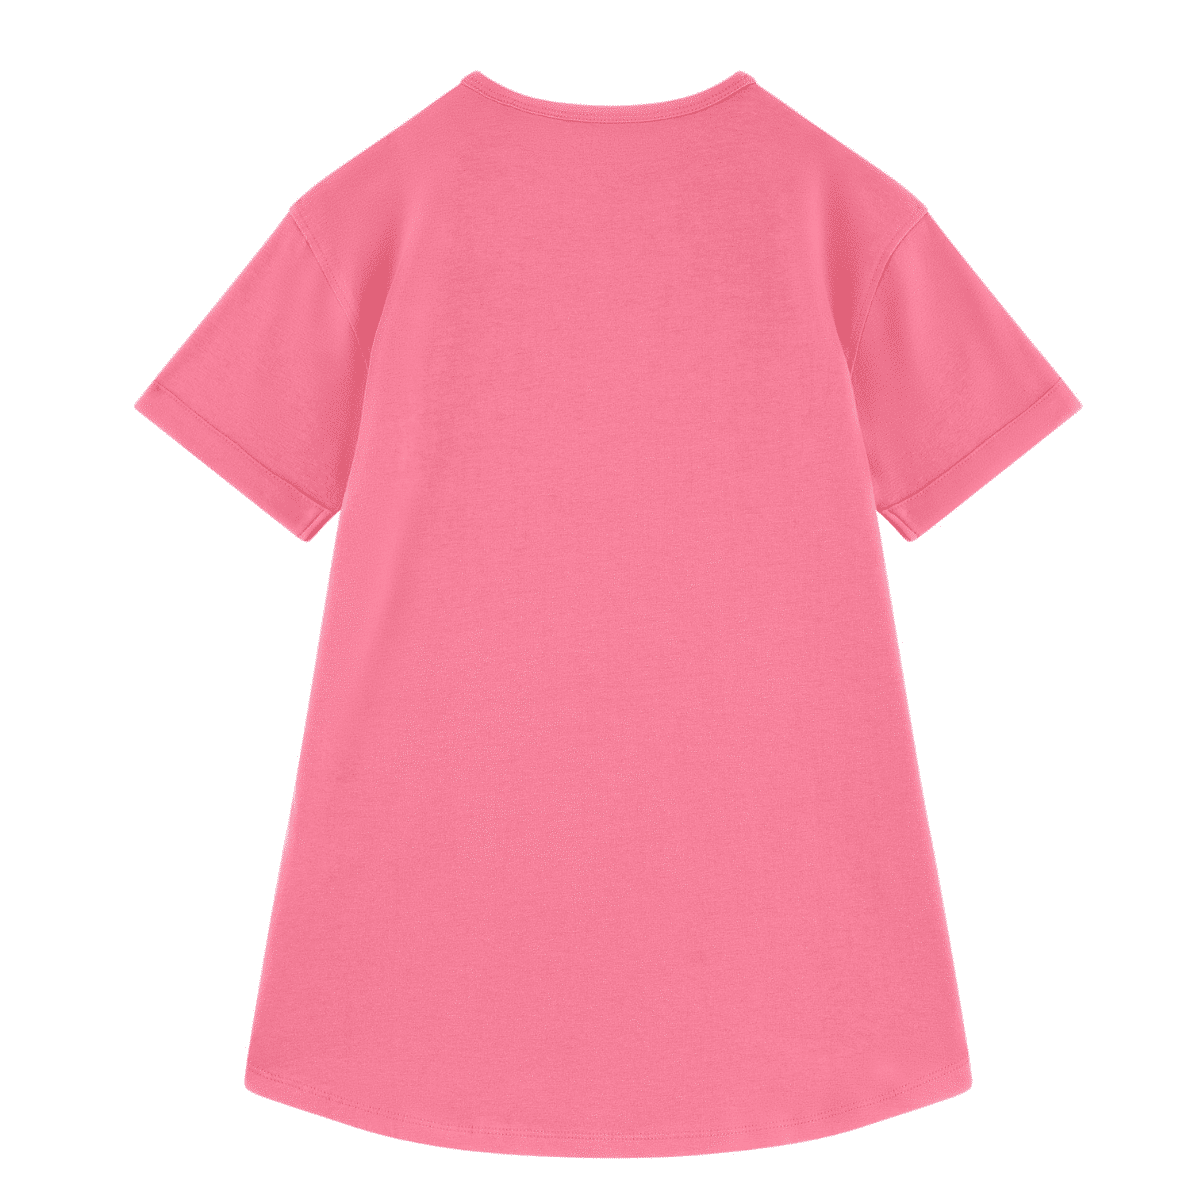 guess girls pink shirt with frilly sleeves back view